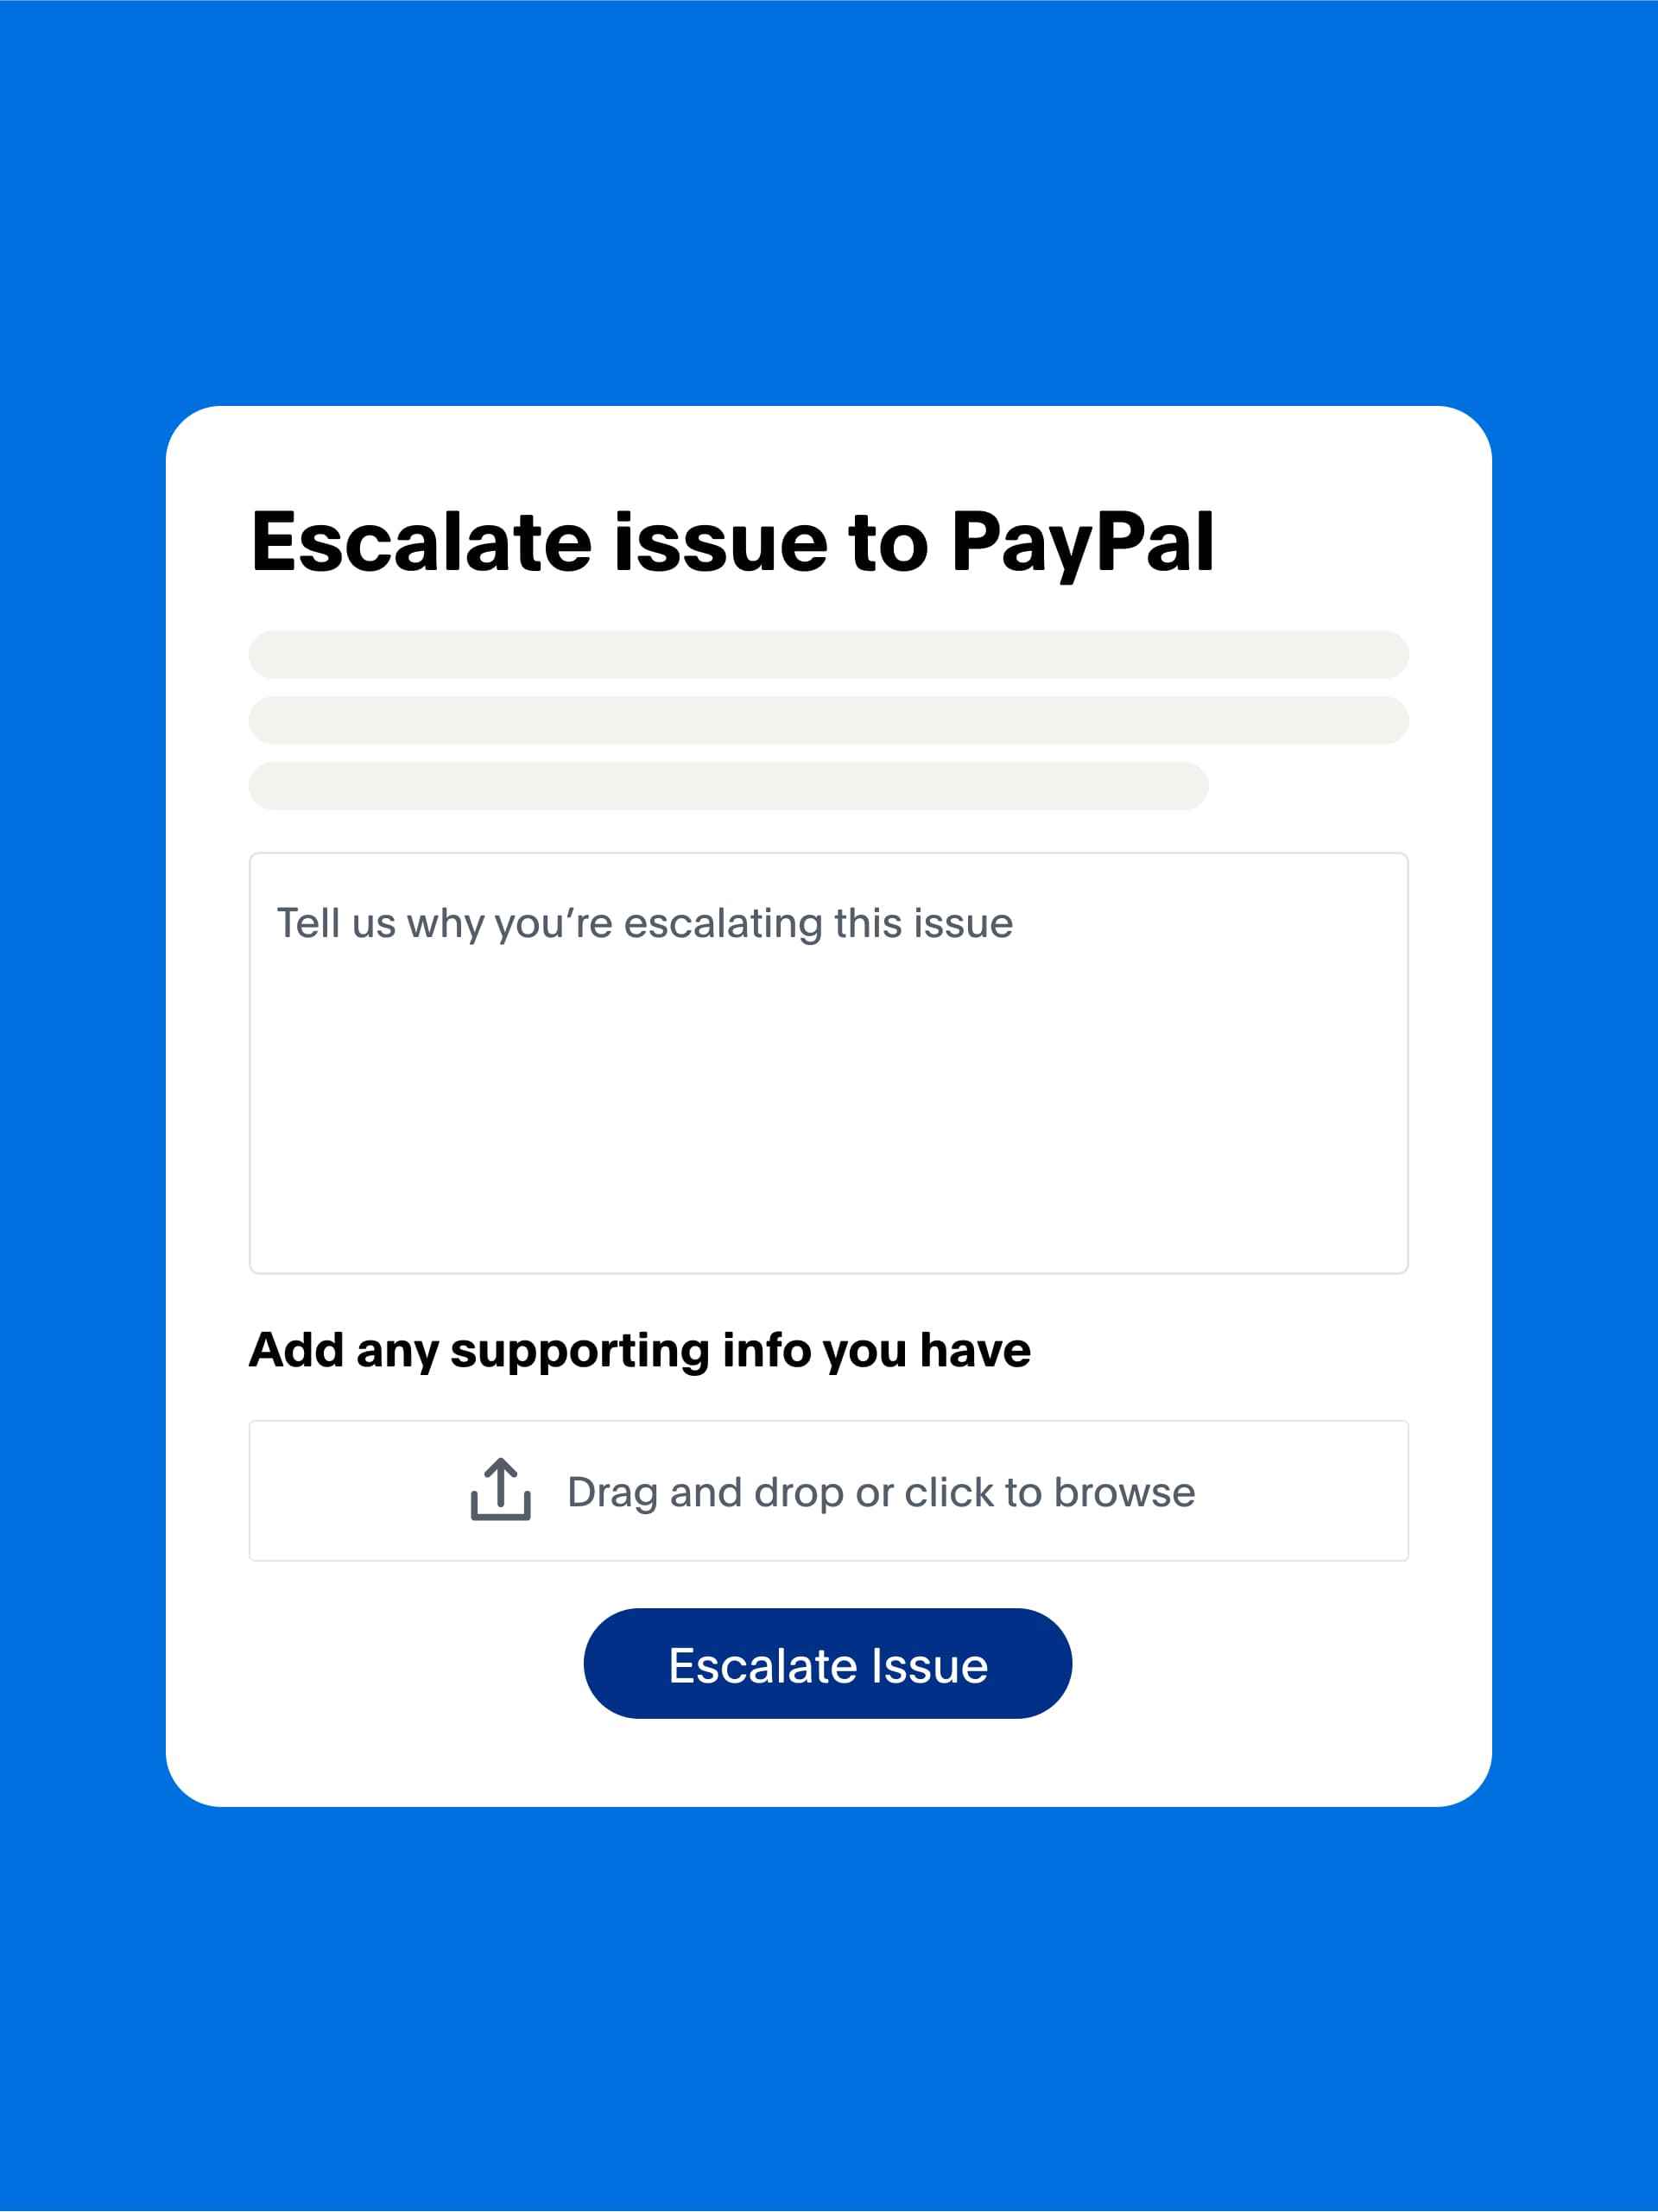 How to Close a Dispute on PayPal: A Merchant Guide in 